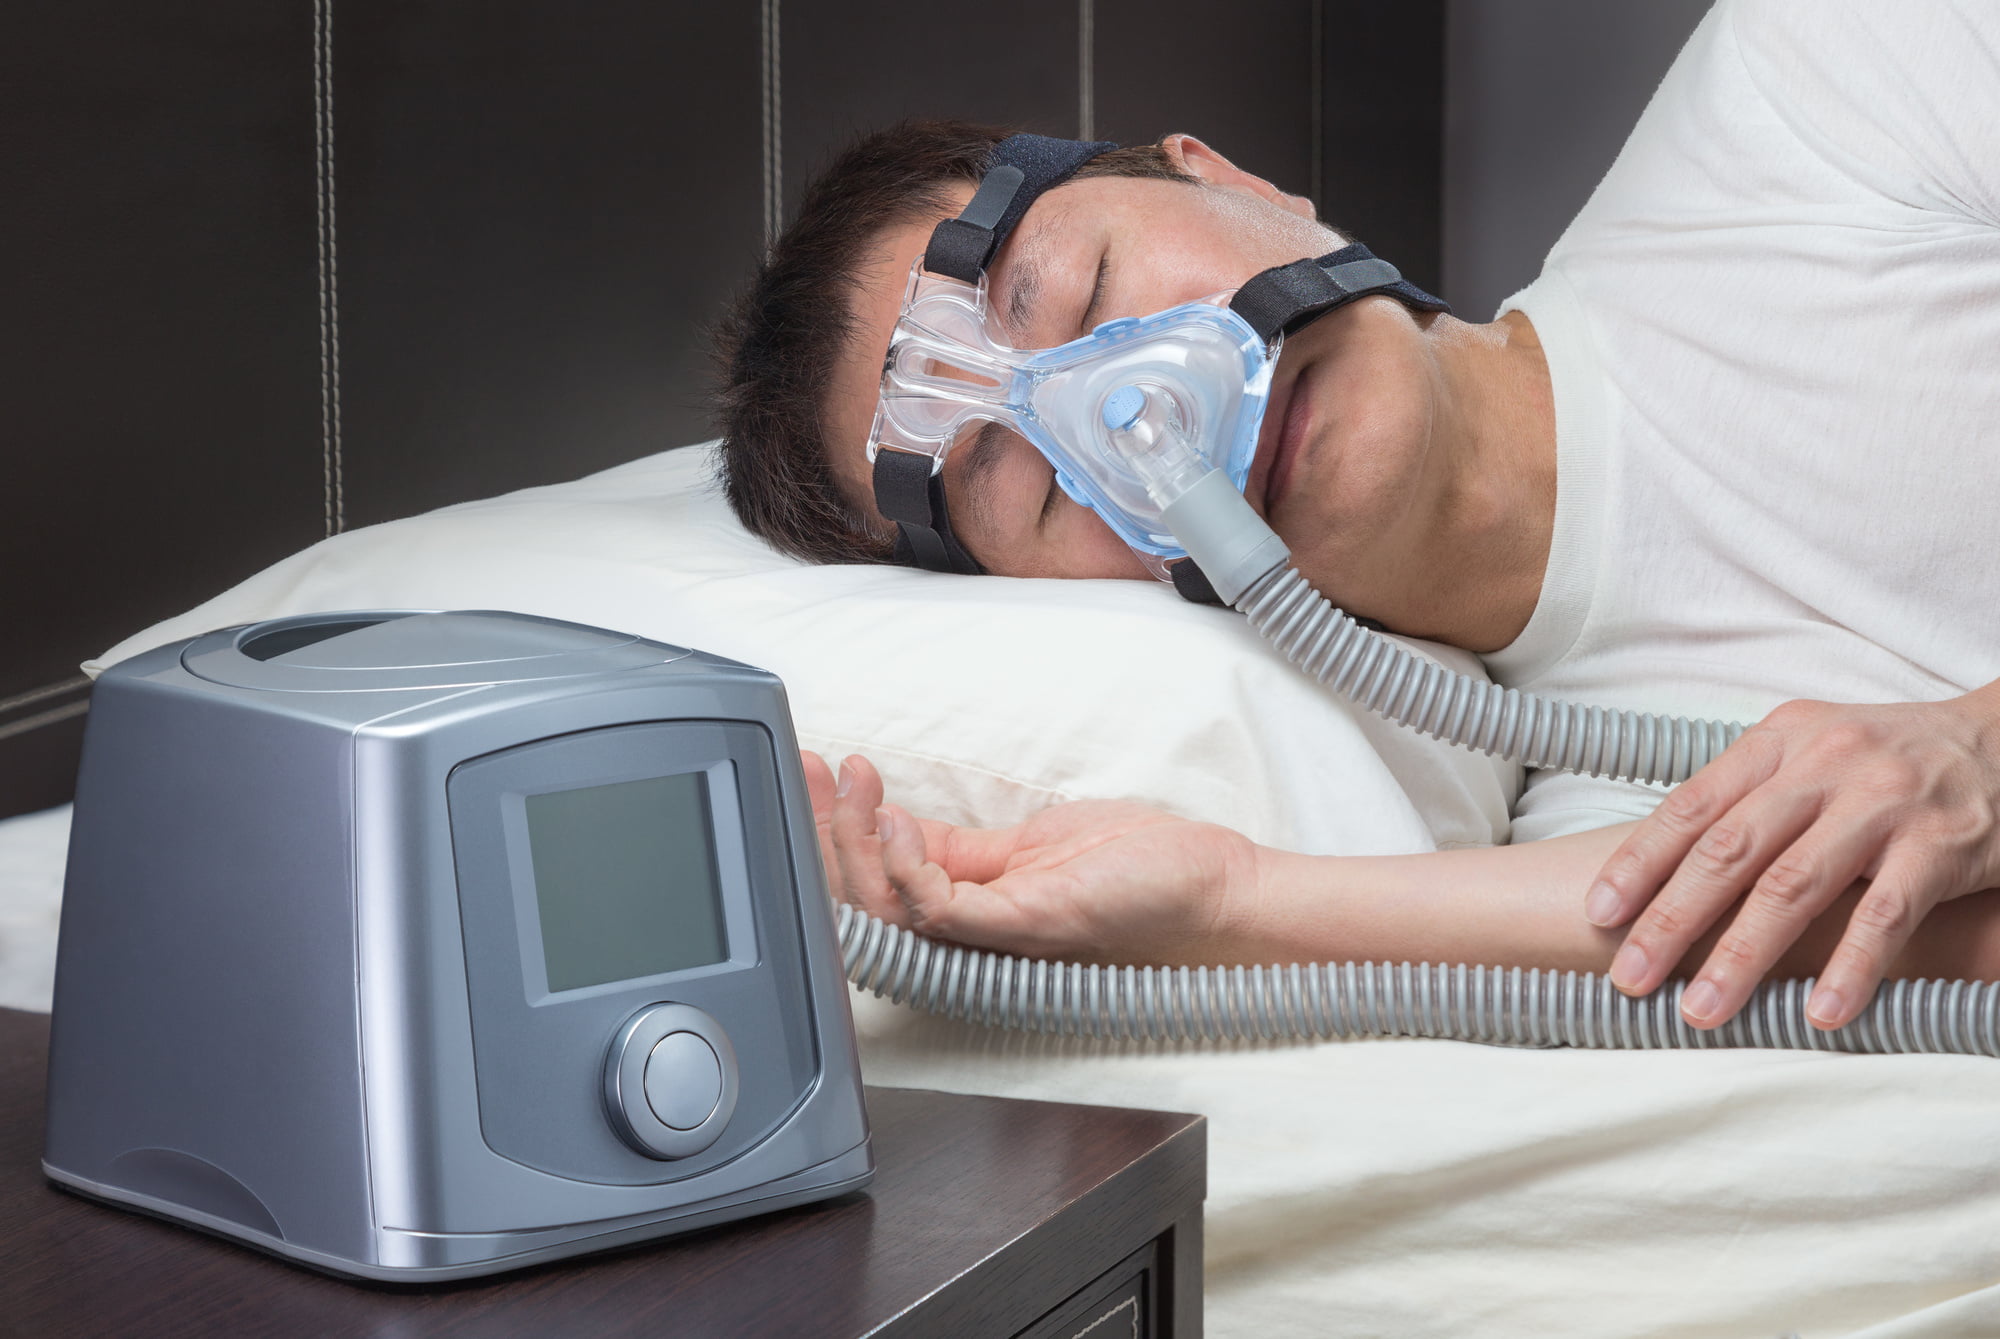 Are you searching for sleep apnea machines? You can read about choosing the most suitable option for your needs in this breakdown.